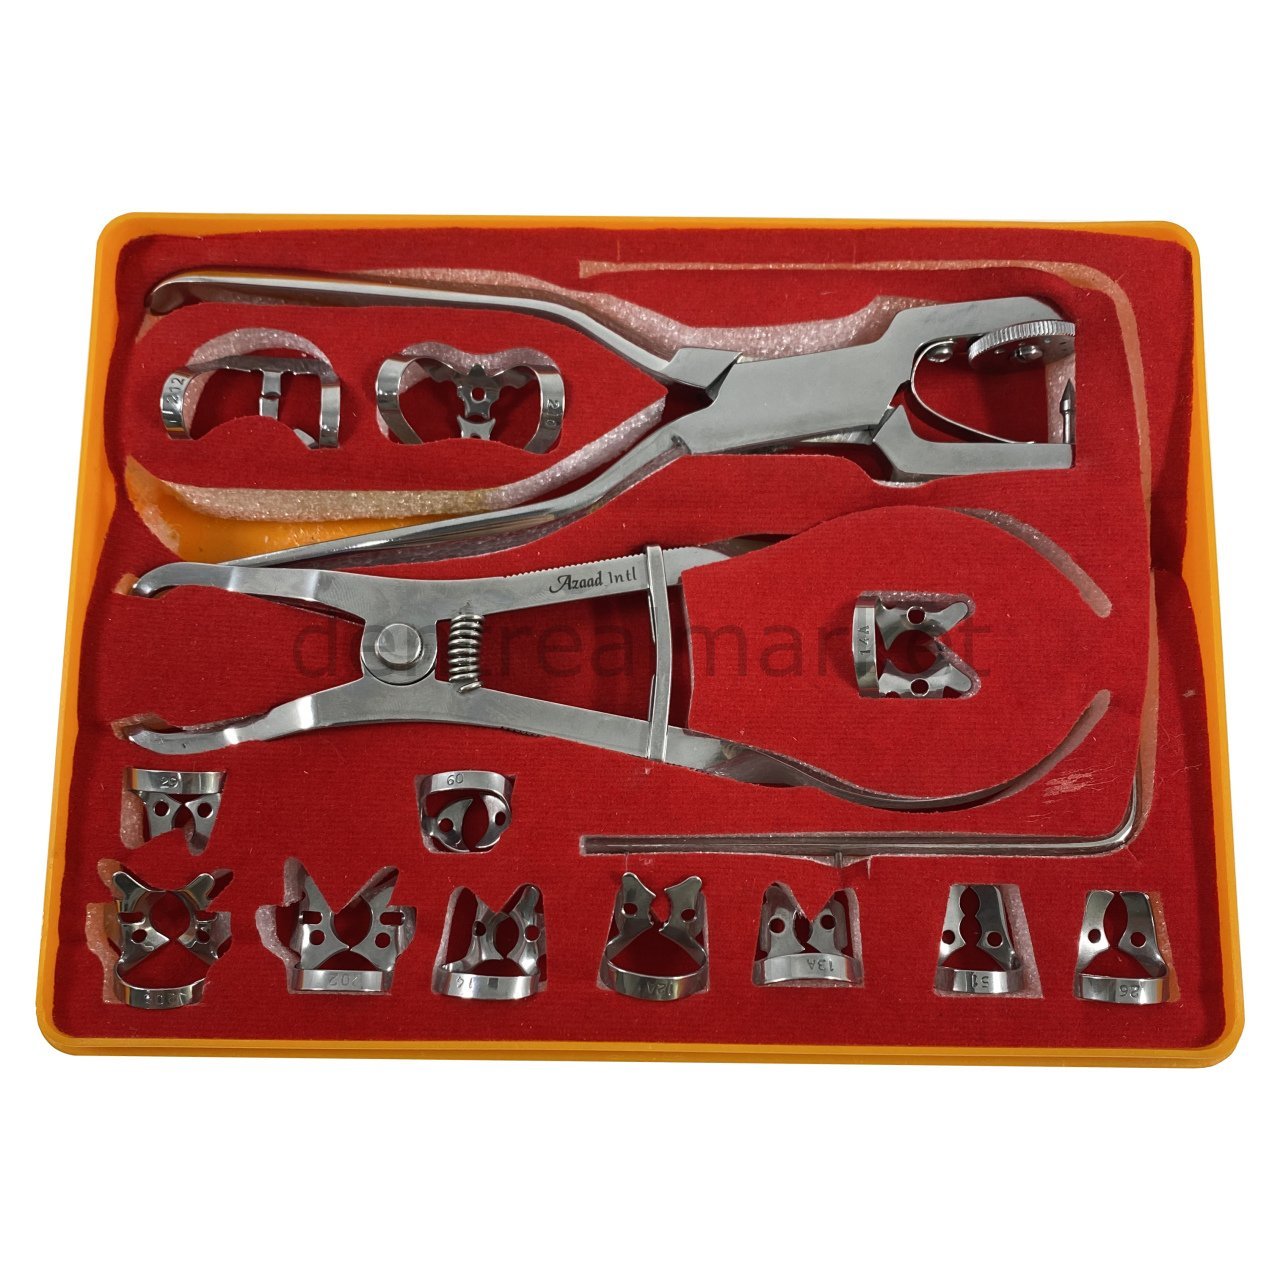 Drm Rubberdam Clamp and Tool Set